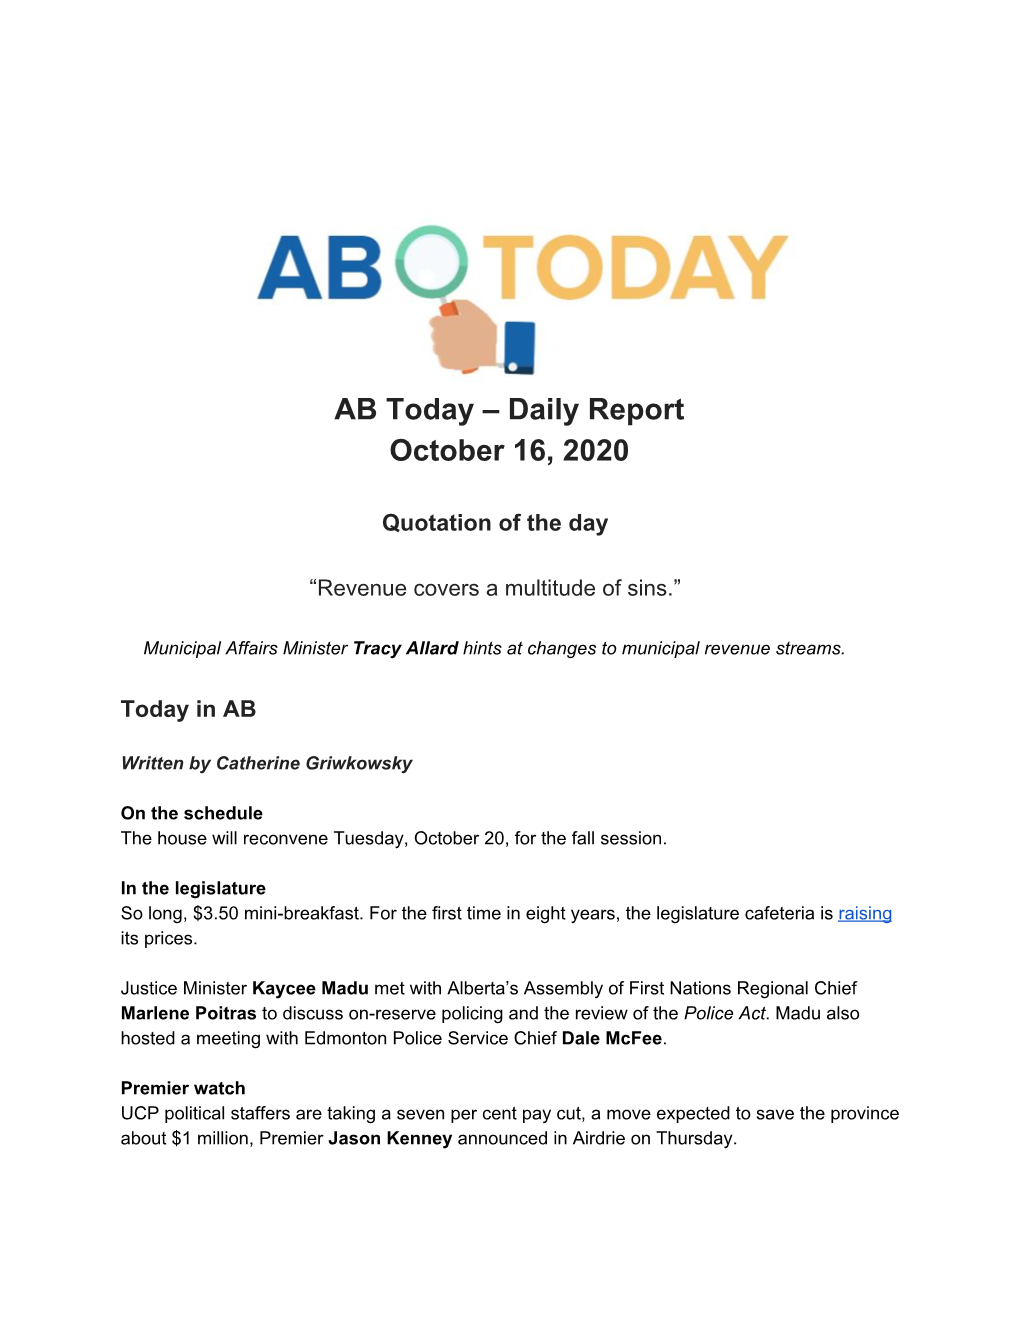 AB Today – Daily Report October 16, 2020